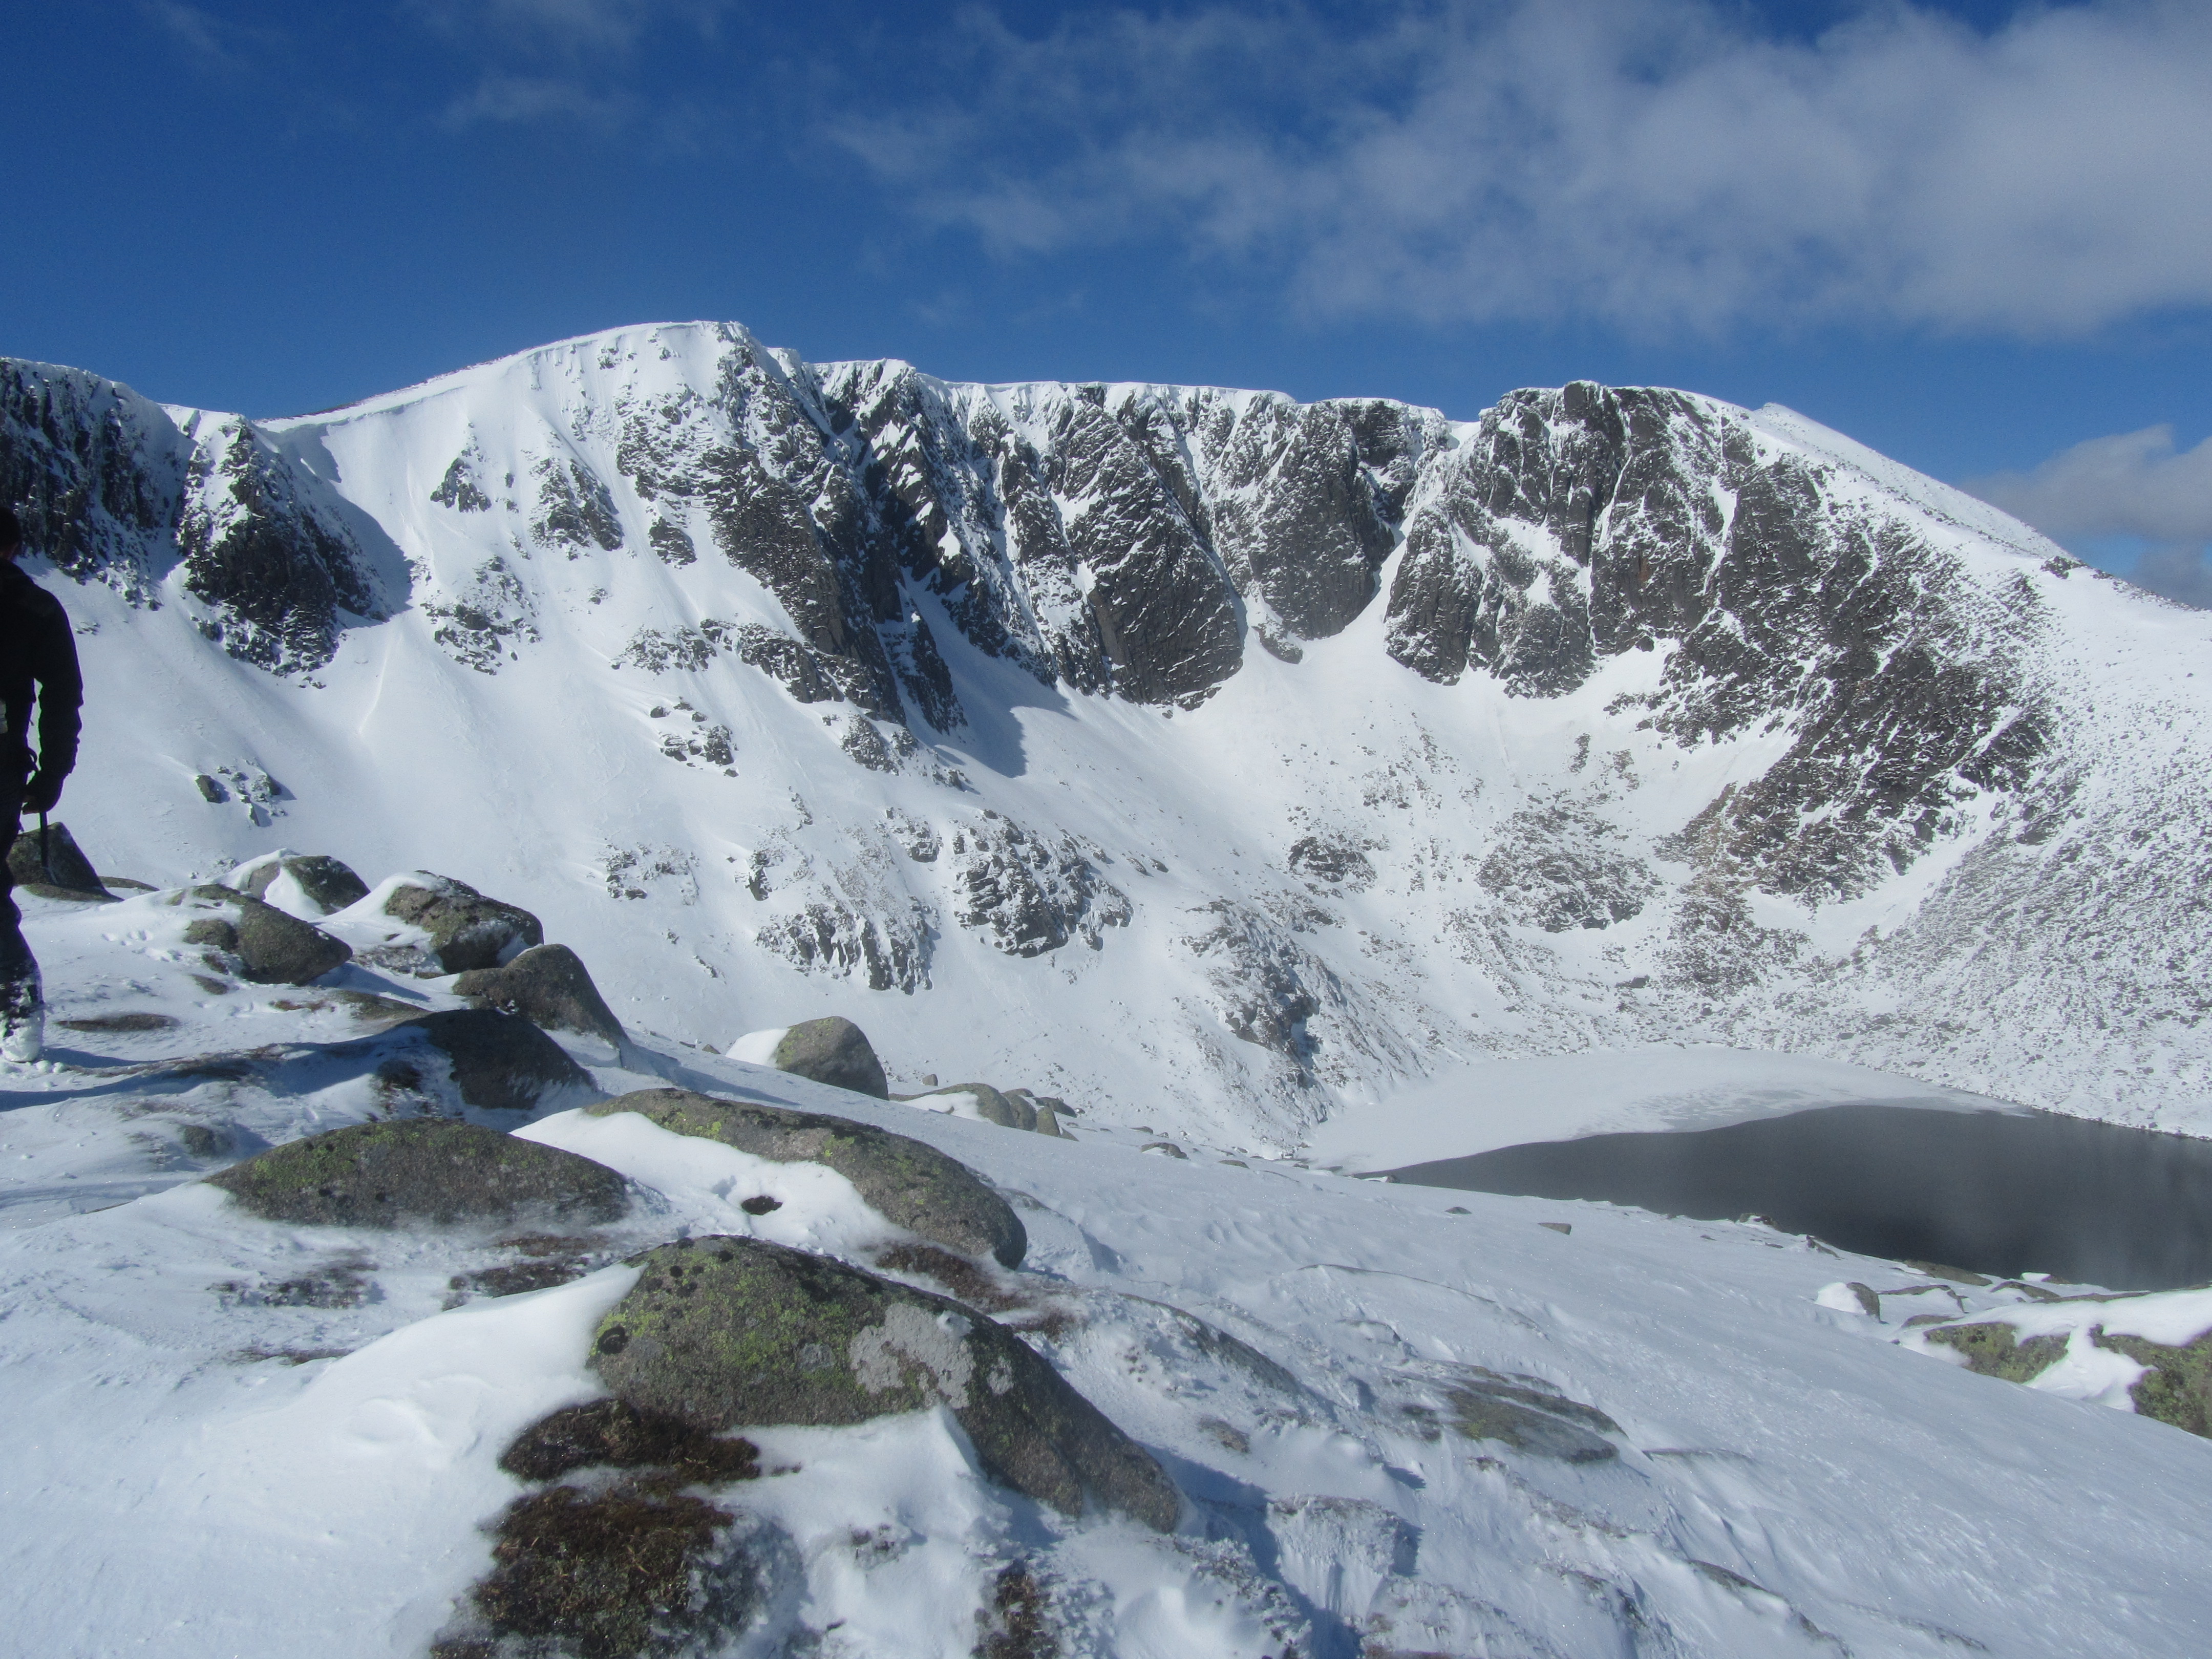 Lochnagar, an iconic mountain like Ben Lomond which is very hard to access without a car